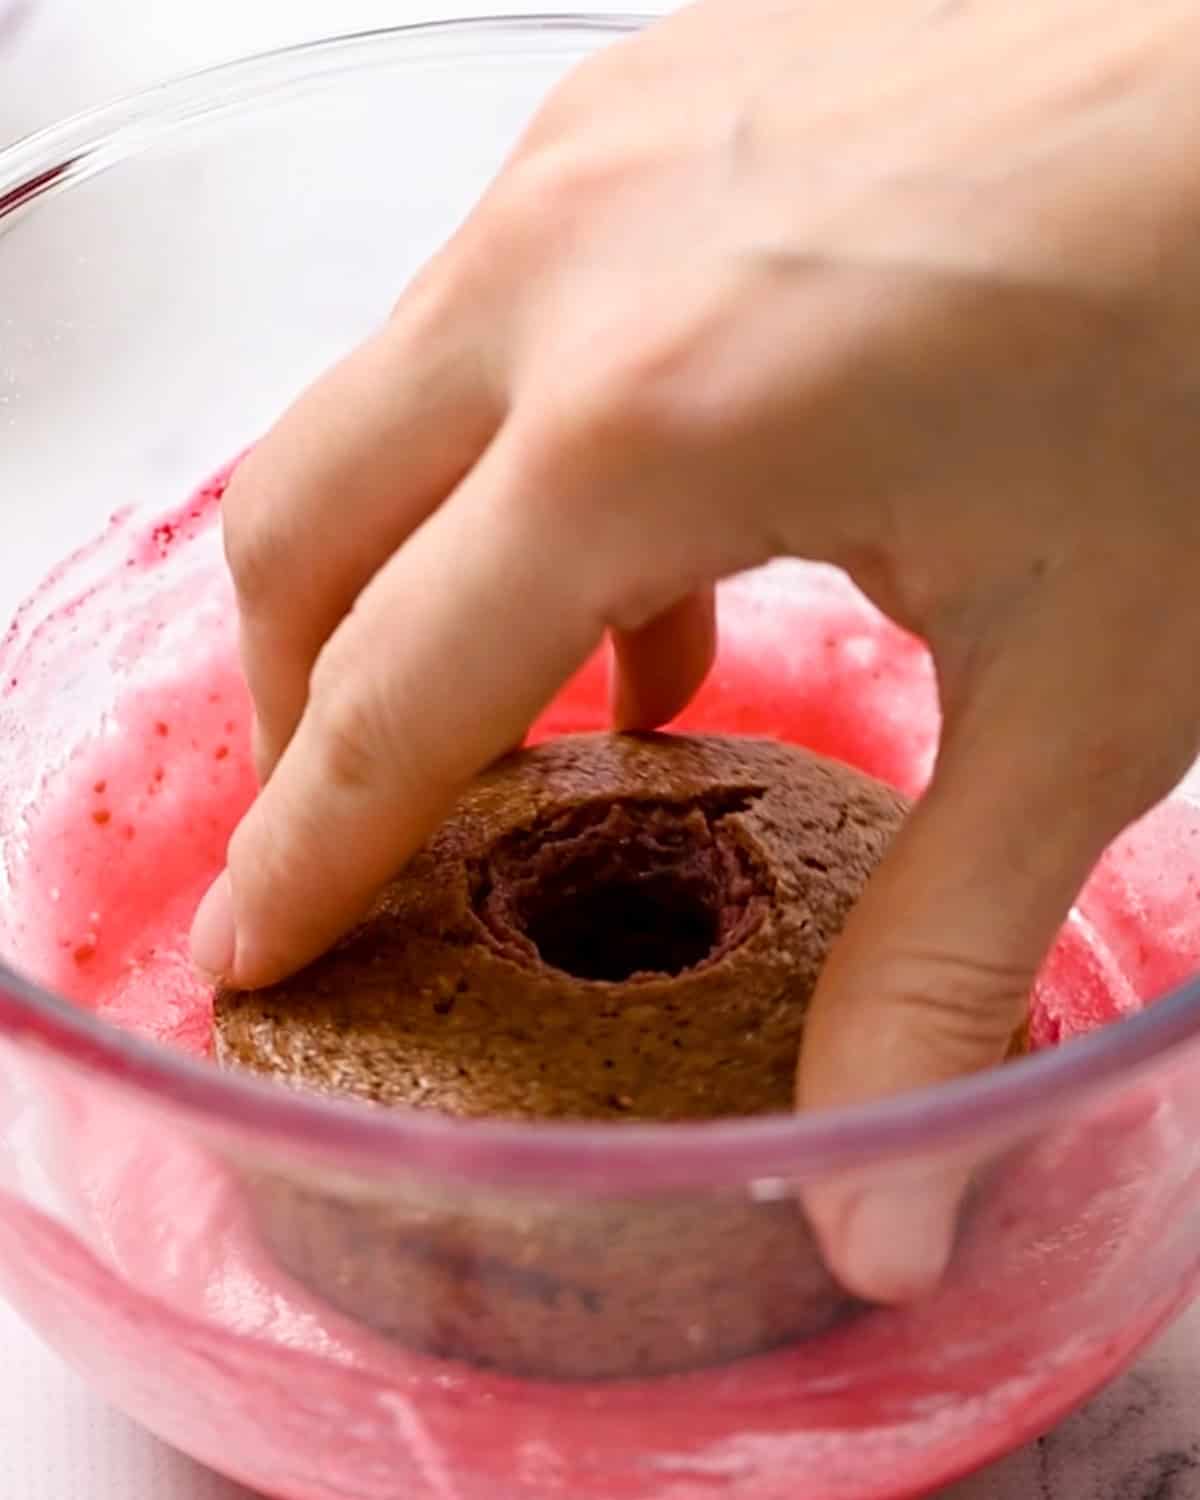 a Baked Raspberry Donut being dipped into raspberry glaze